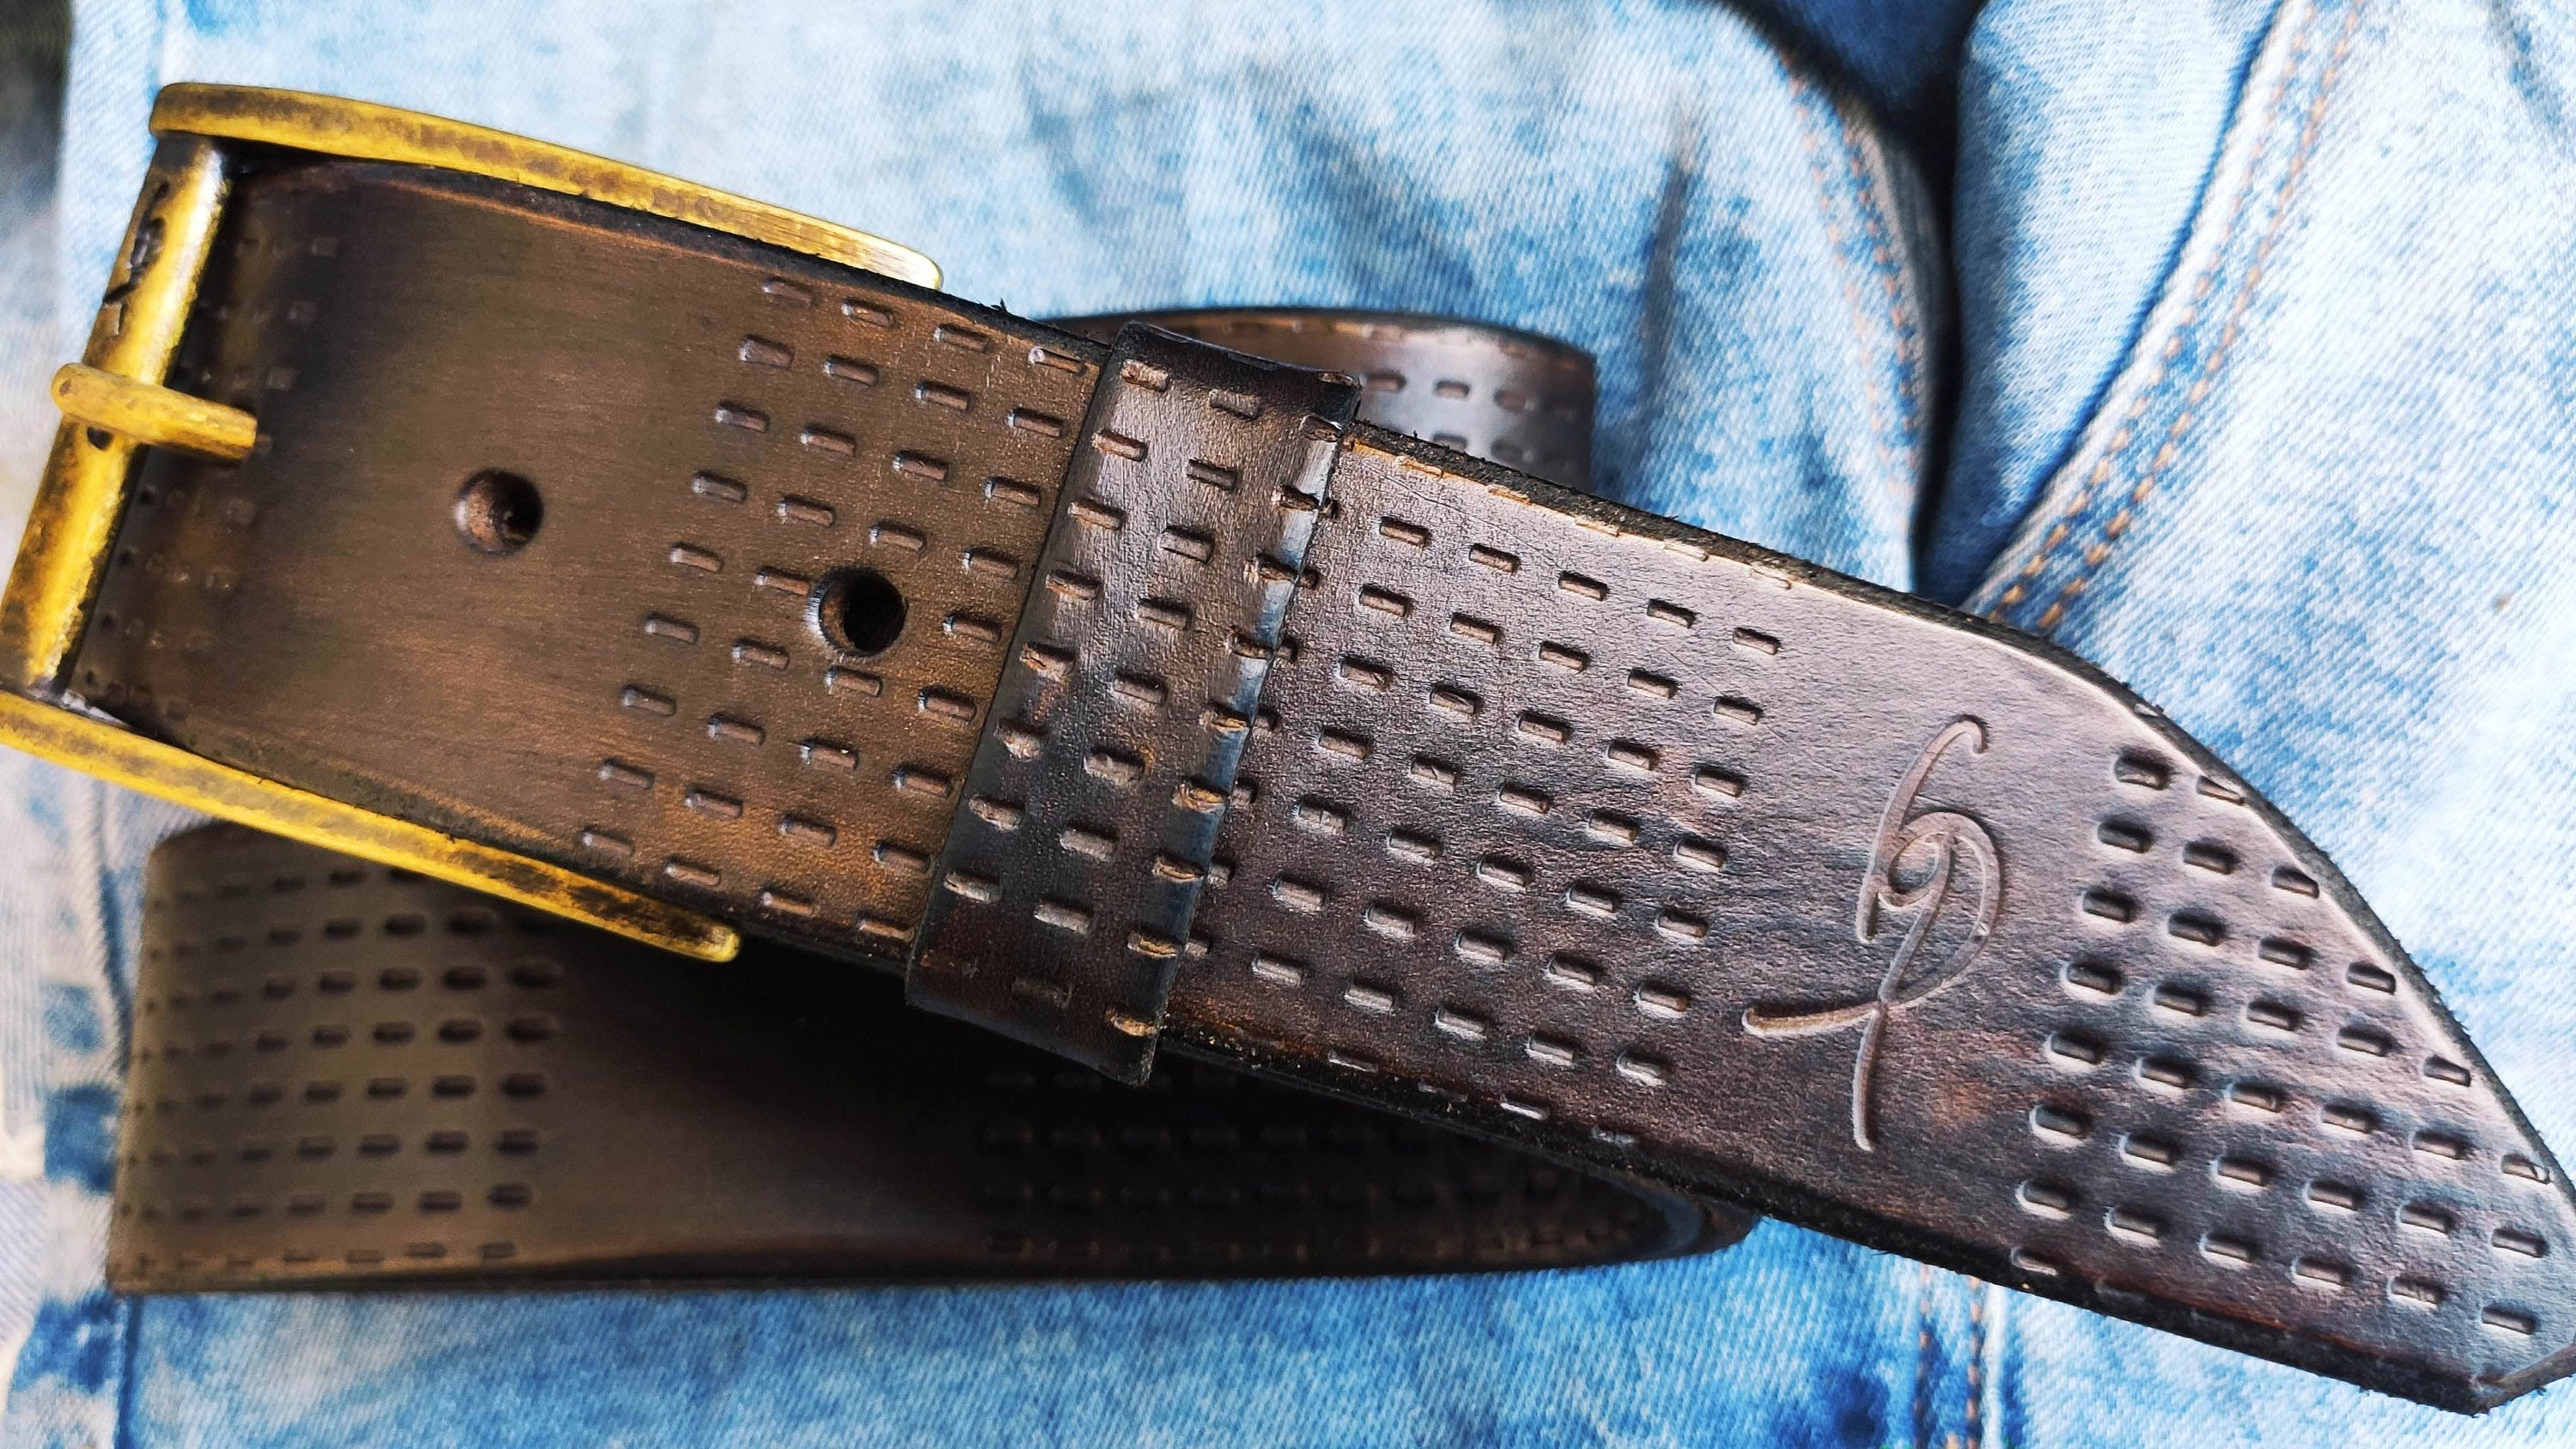 Mens Brown Belt Leather With arrow embossed design - SUNSET LEATHER